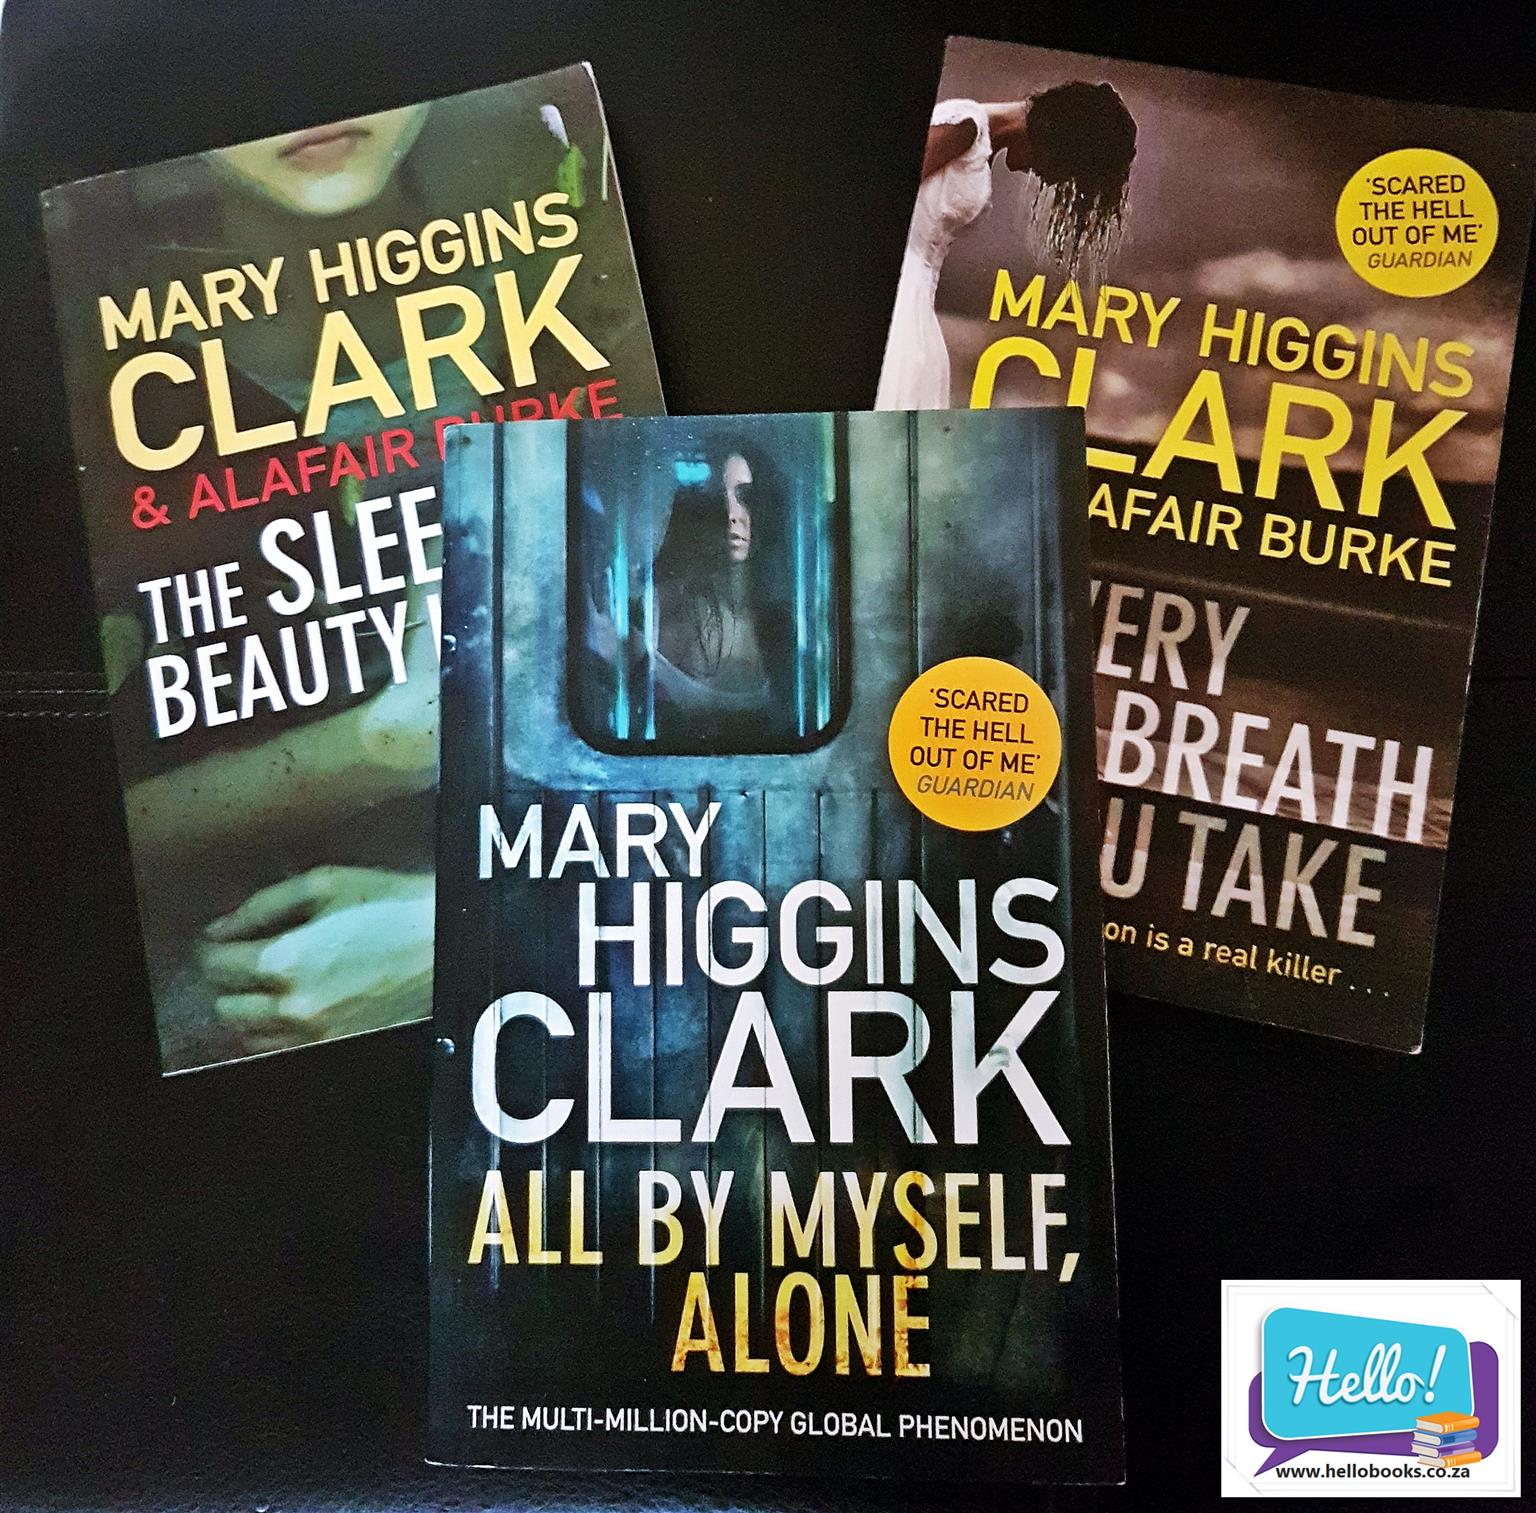 Books by Mary Higgins Clark | Junk Mail1536 x 1513